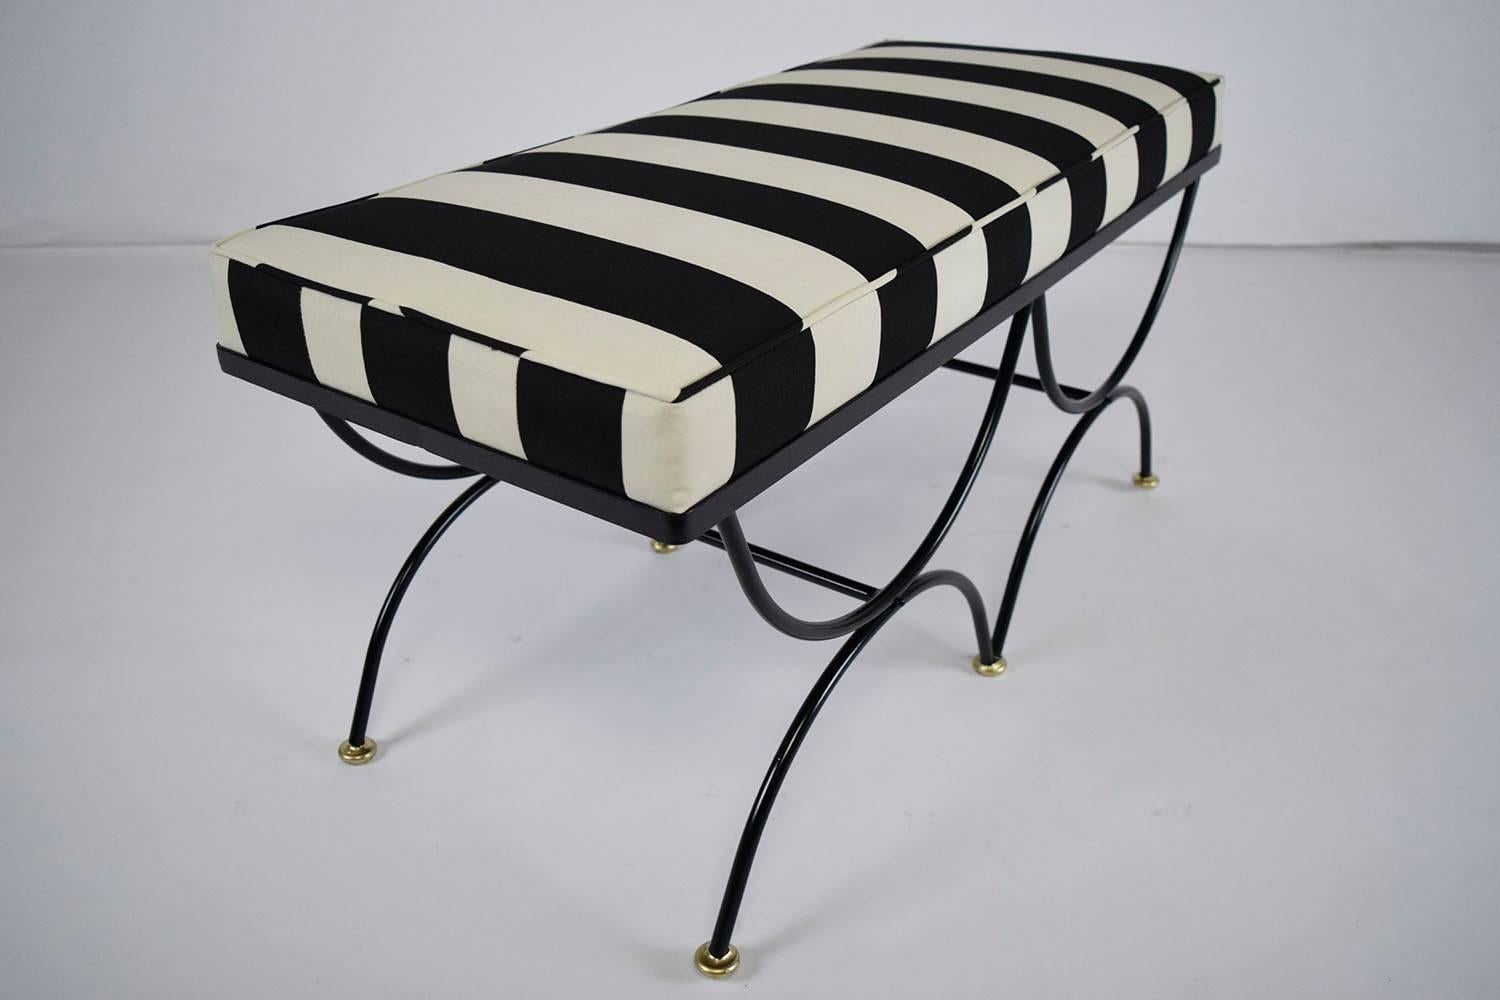 This 1960s Vintage Regency-style bench features iron legs that have recently been painted in a black color with a flat finish. The frame consists of four half circles that are connected by stretcher bars and is finished with round feet. The round